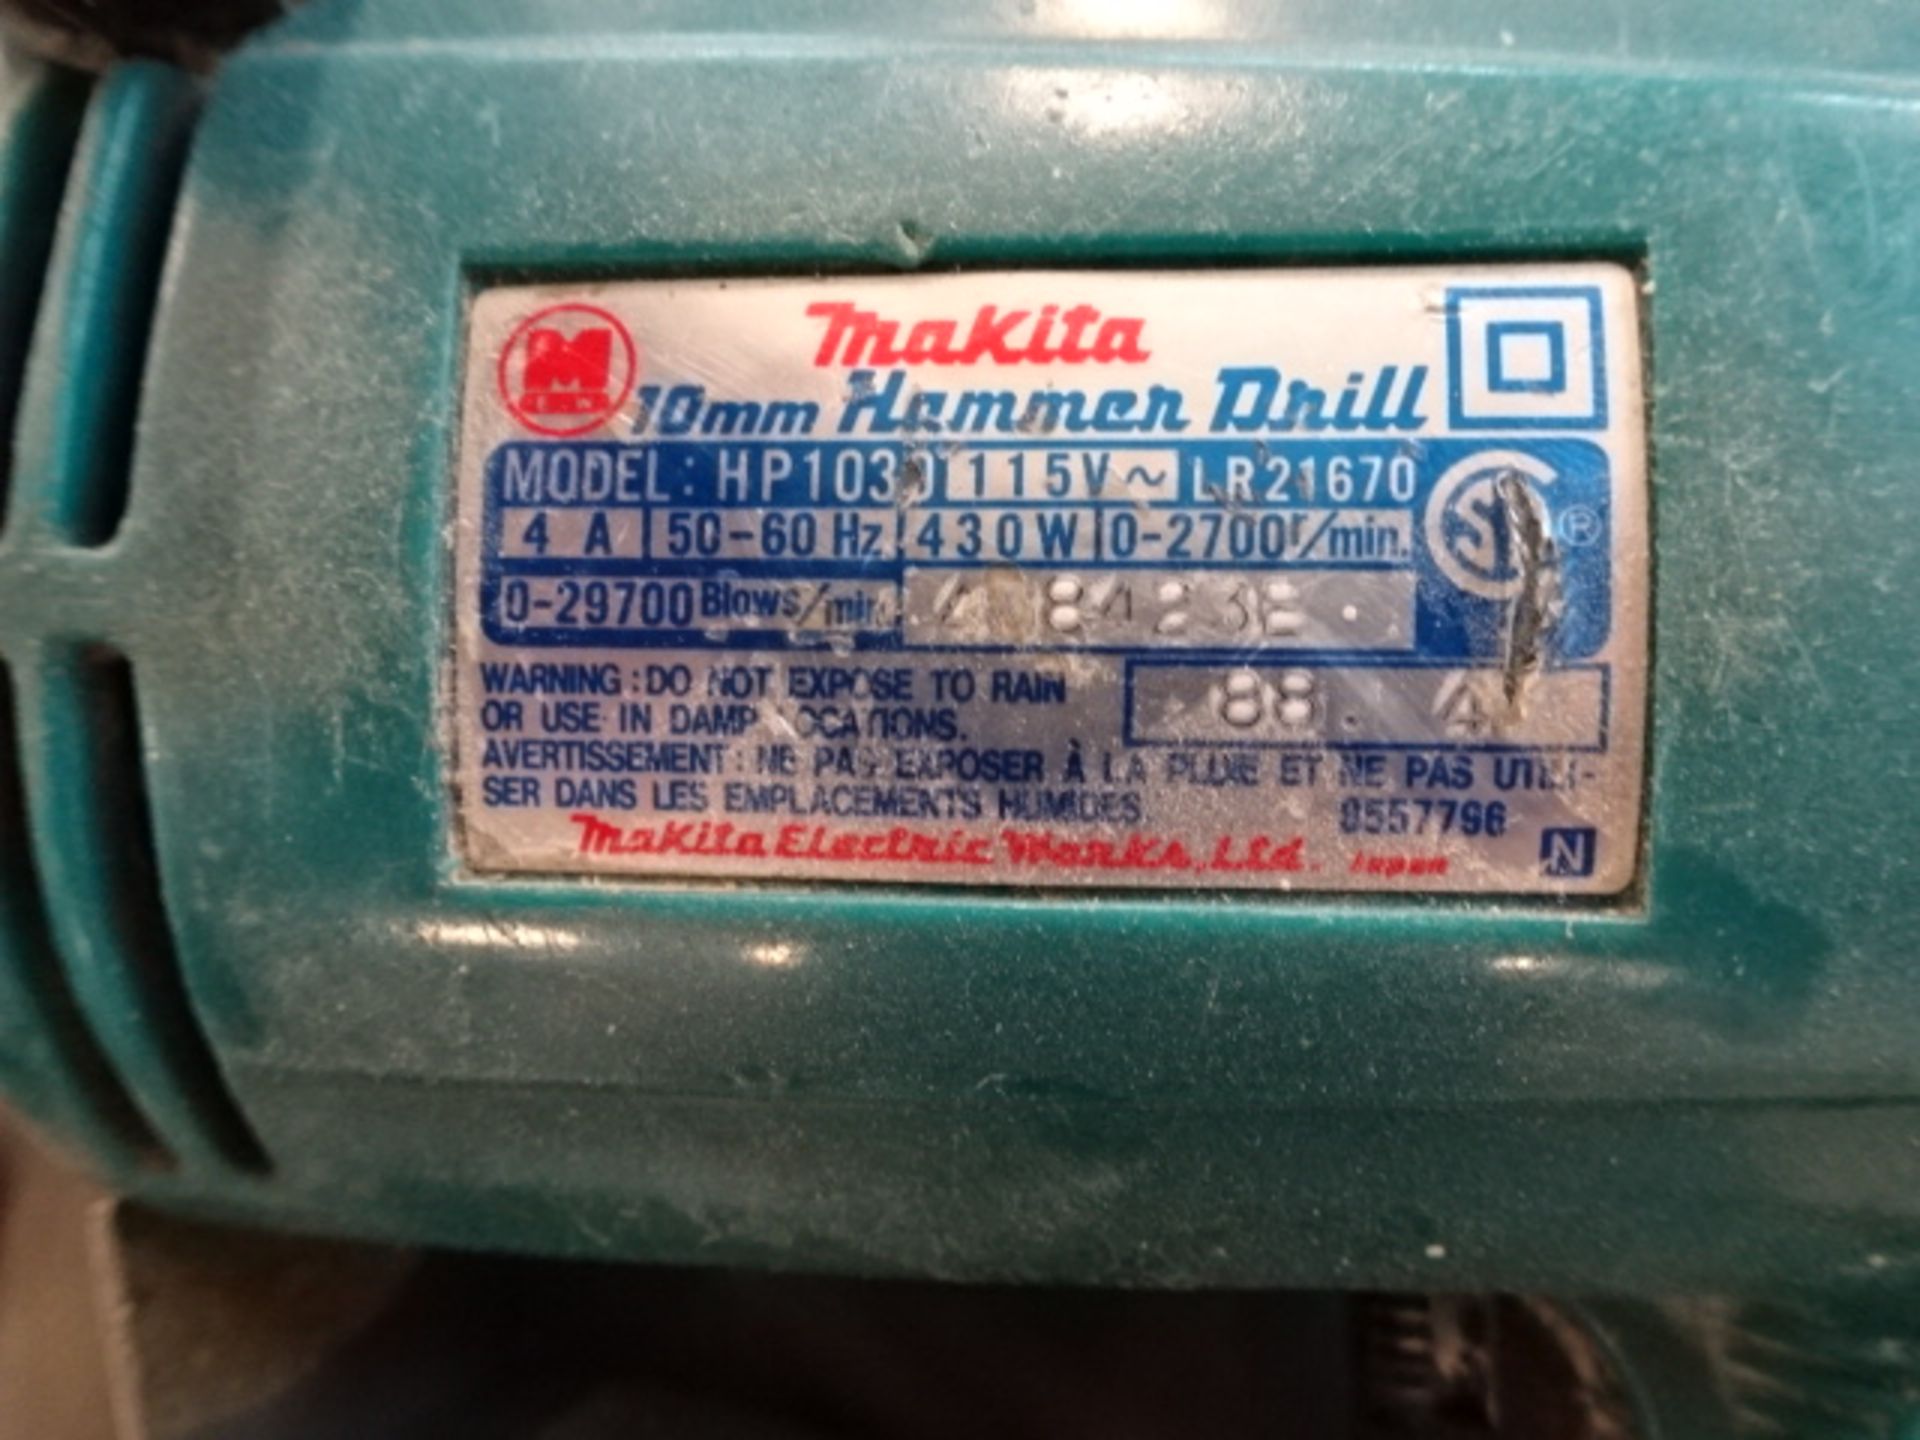 Perceuse à percussion électrique "Makita" Electric hammer drill - Image 2 of 2